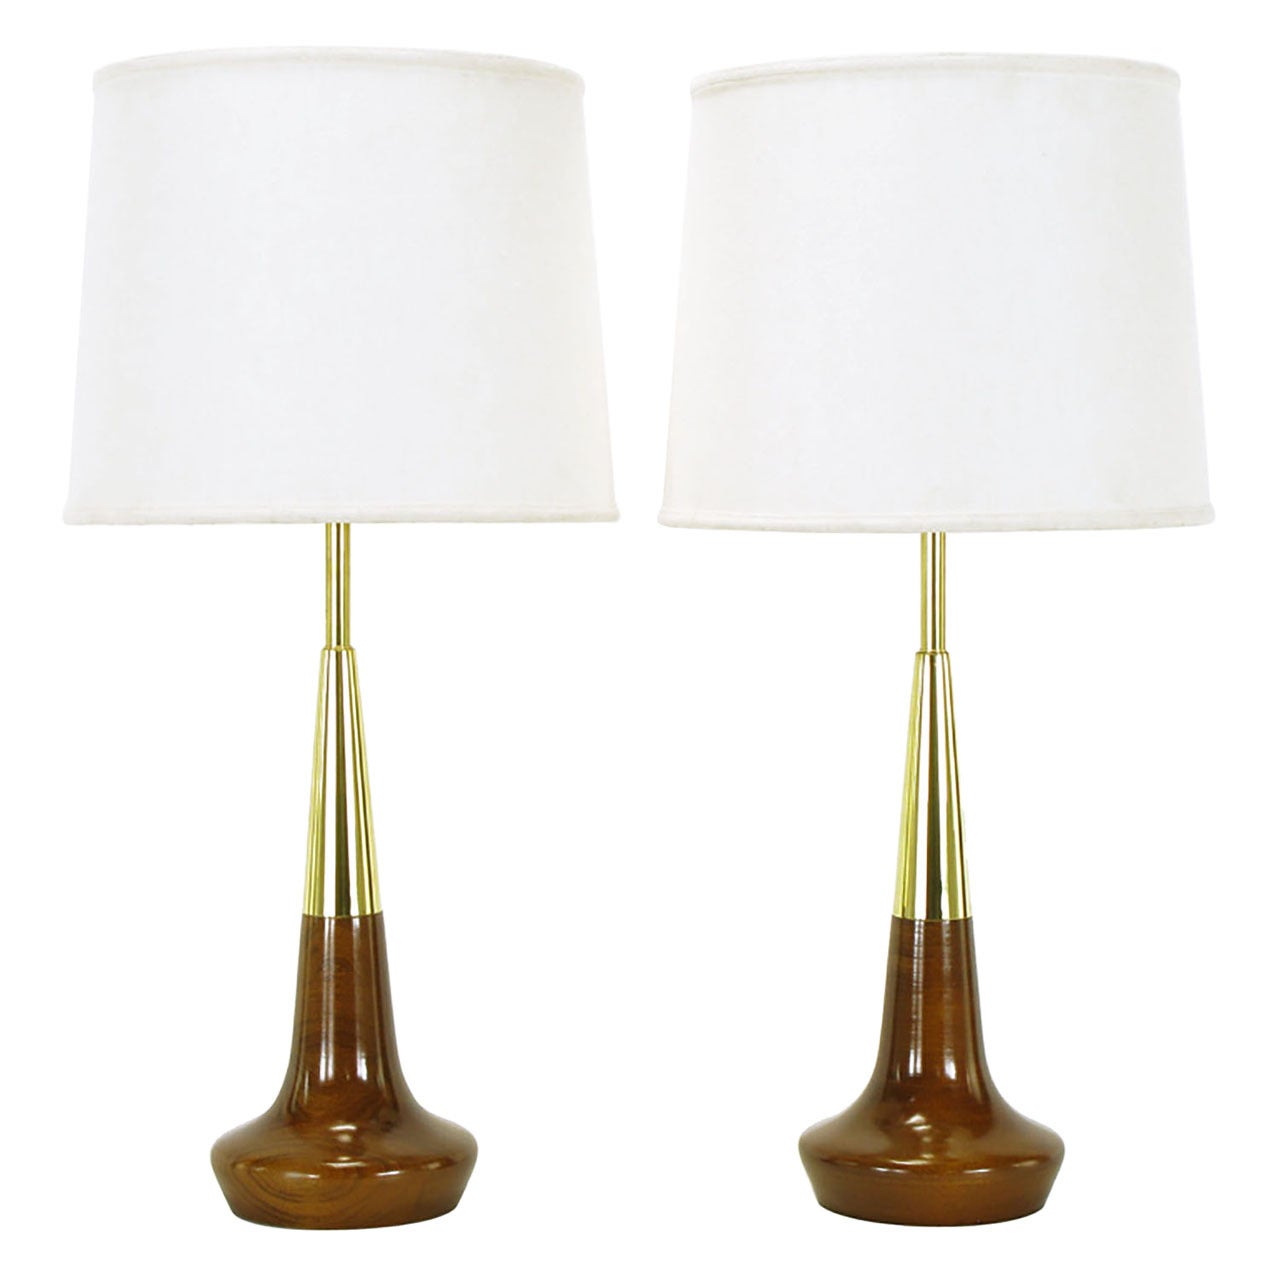 Pair of Lightolier Brass and Walnut Table Lamps